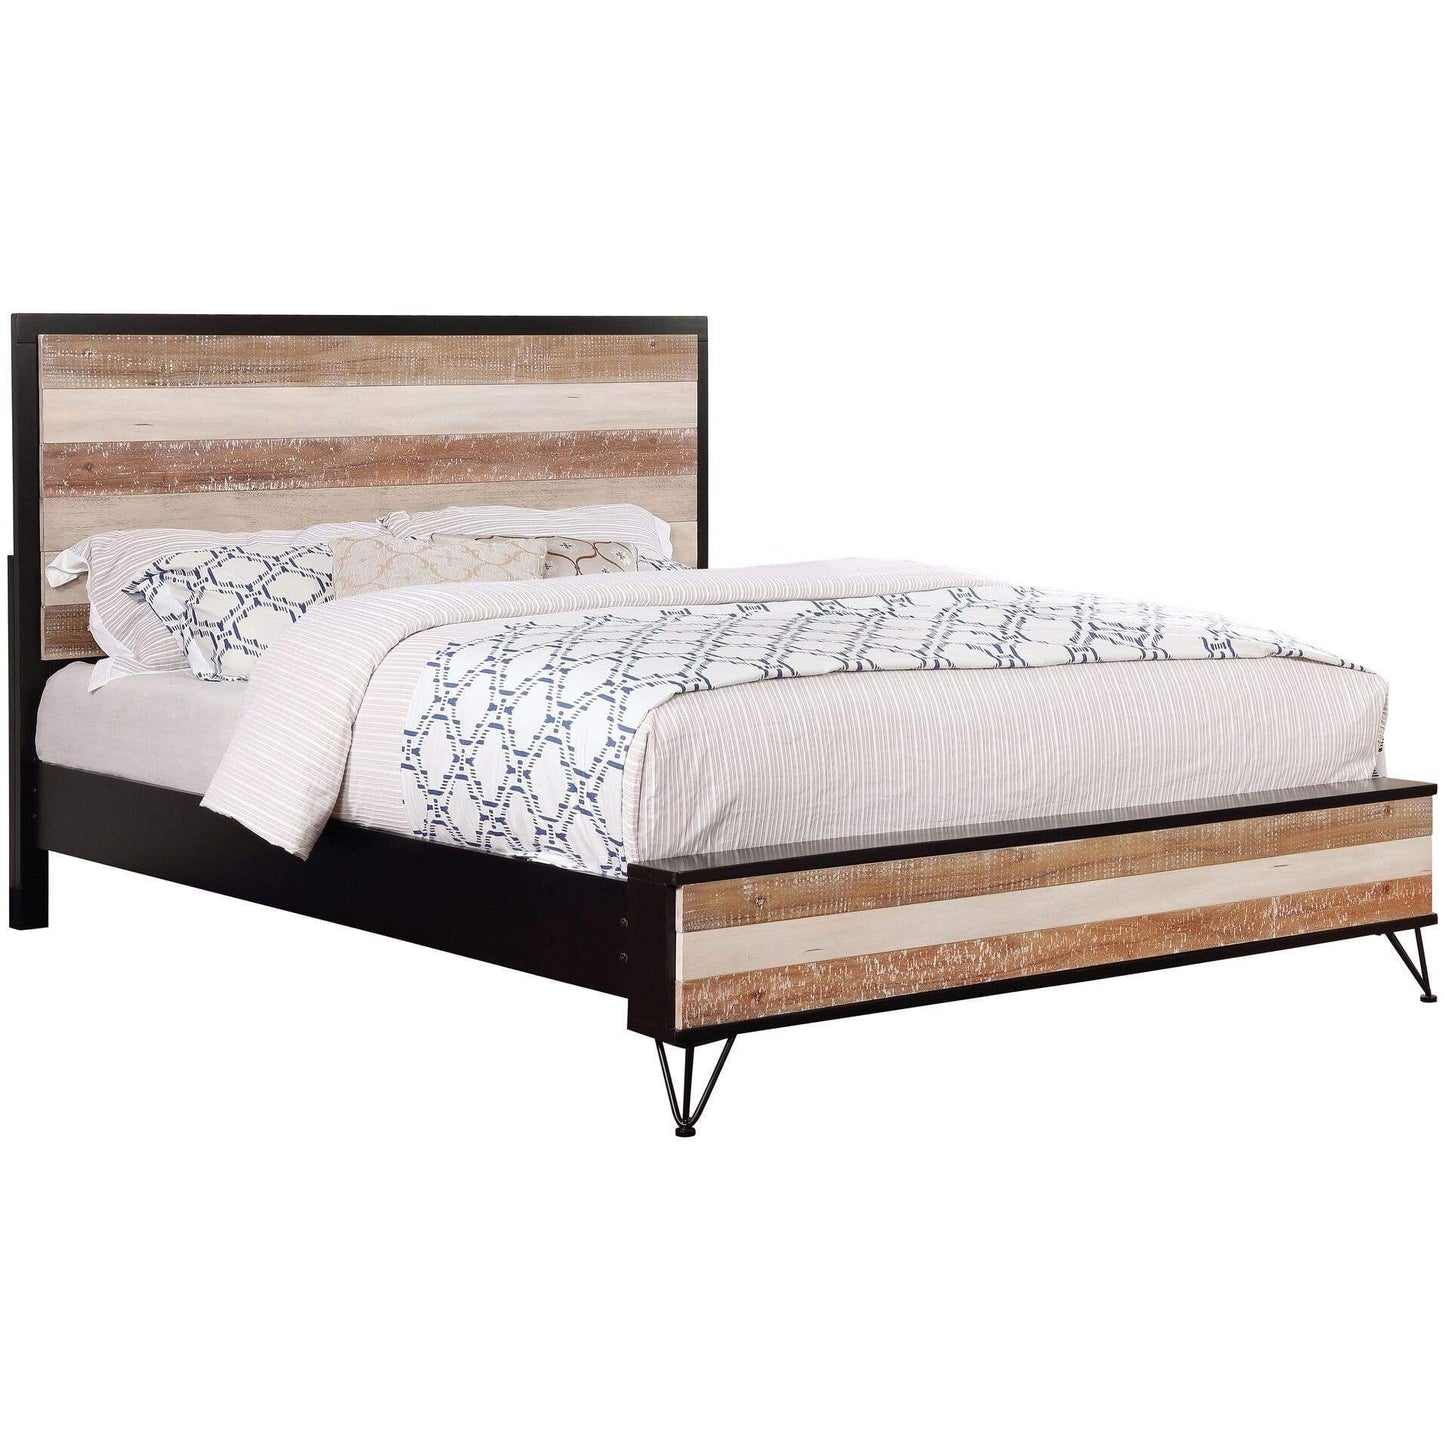 Furniture of America Beds Sicily Transitional Queen Bed in Espresso